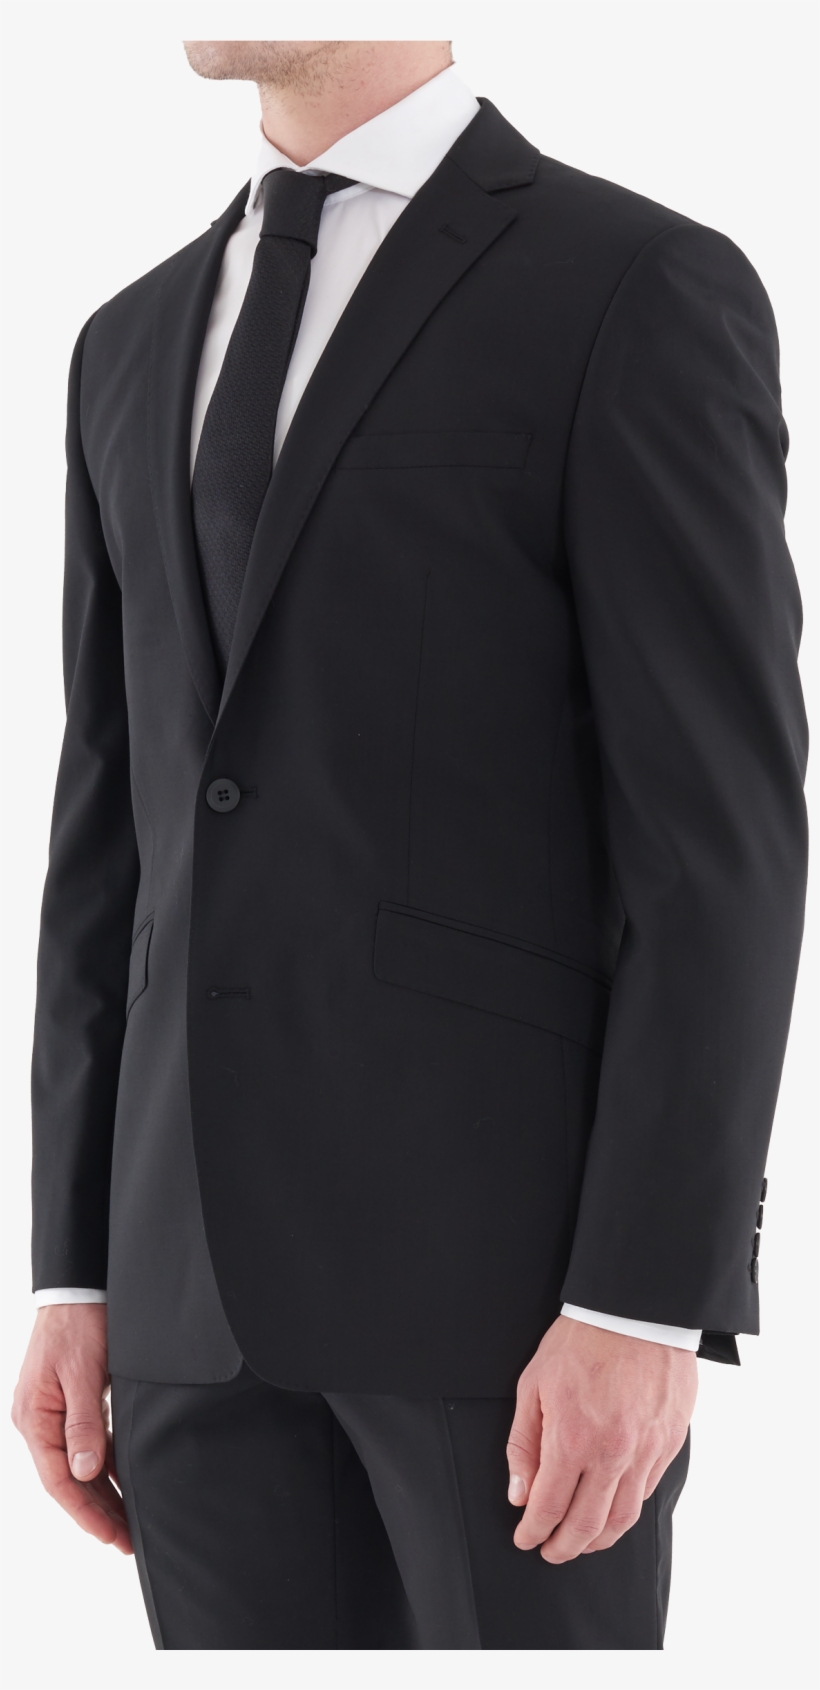 Tuxedo - Free Transparent PNG Download - PNGkey